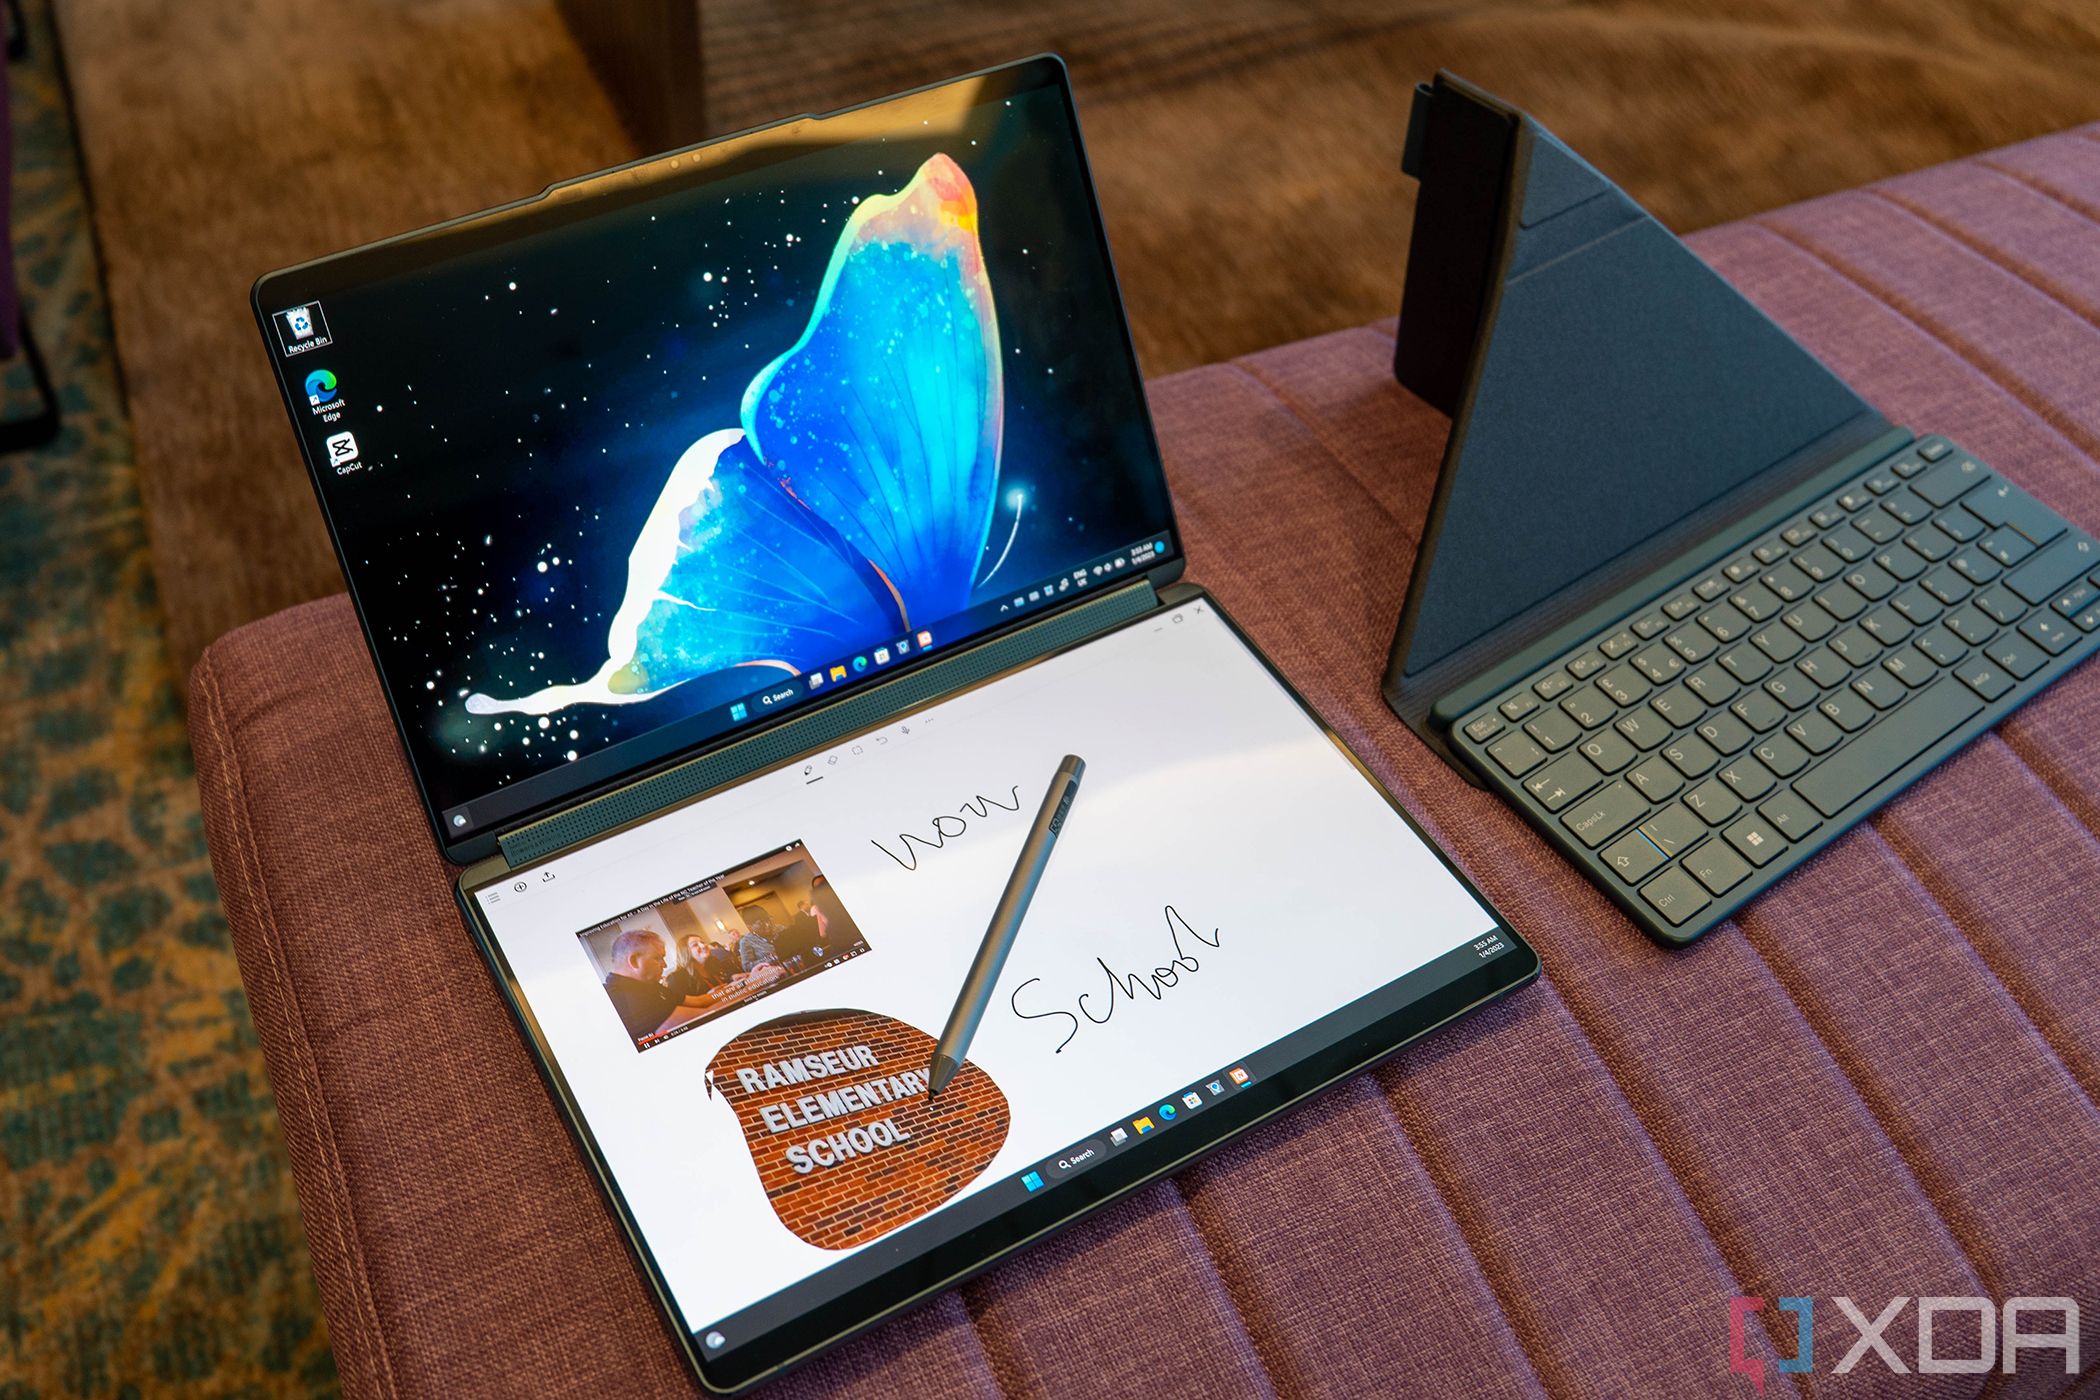 Pen on top of a dual-screen laptop